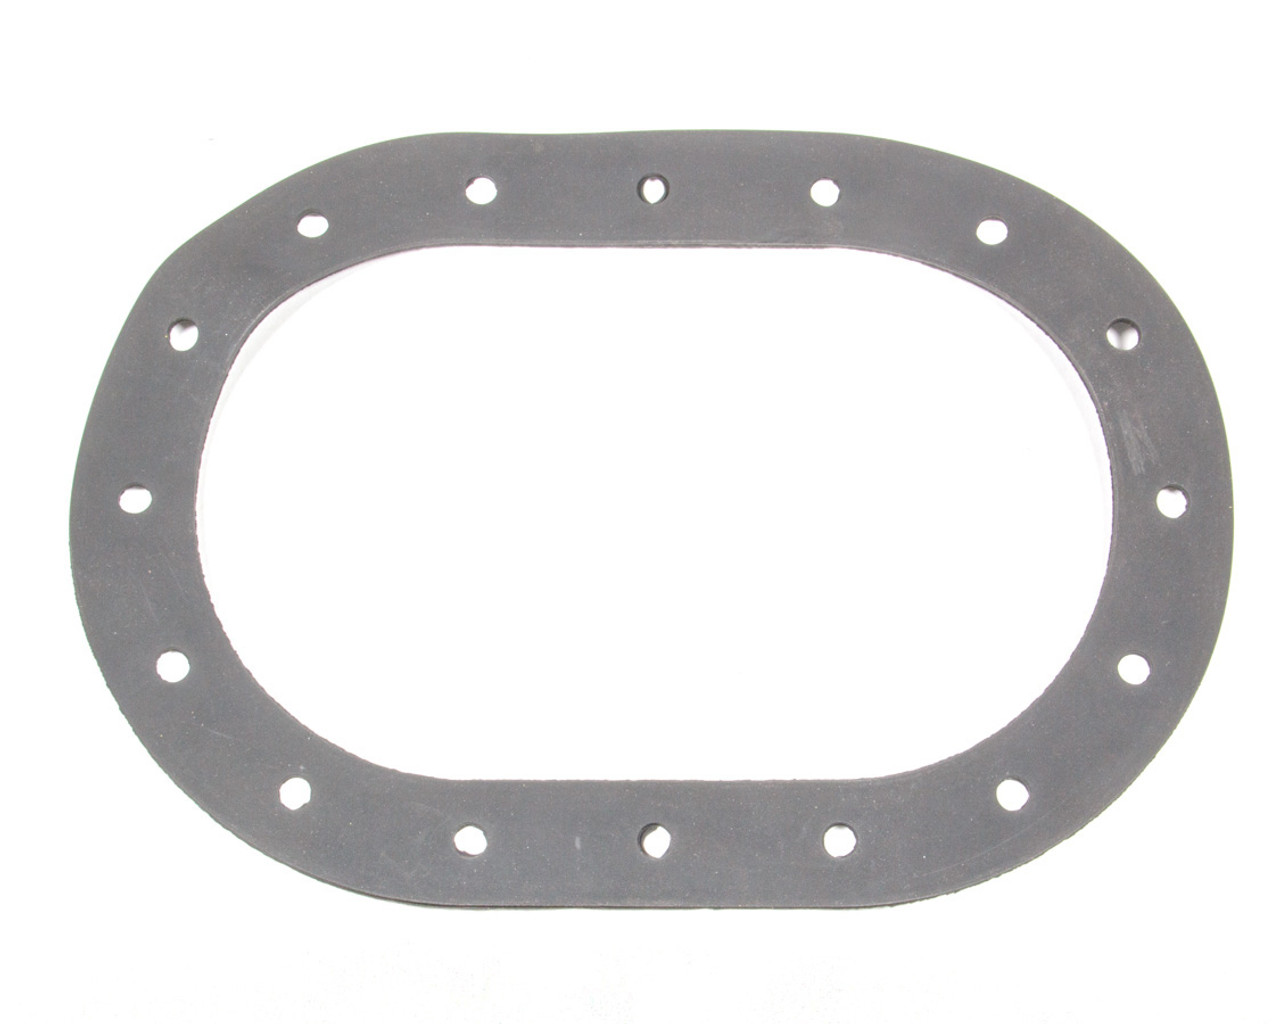 RCI Gasket Oval Fill Plate 16-Hole for C/T Cells - RCI0111